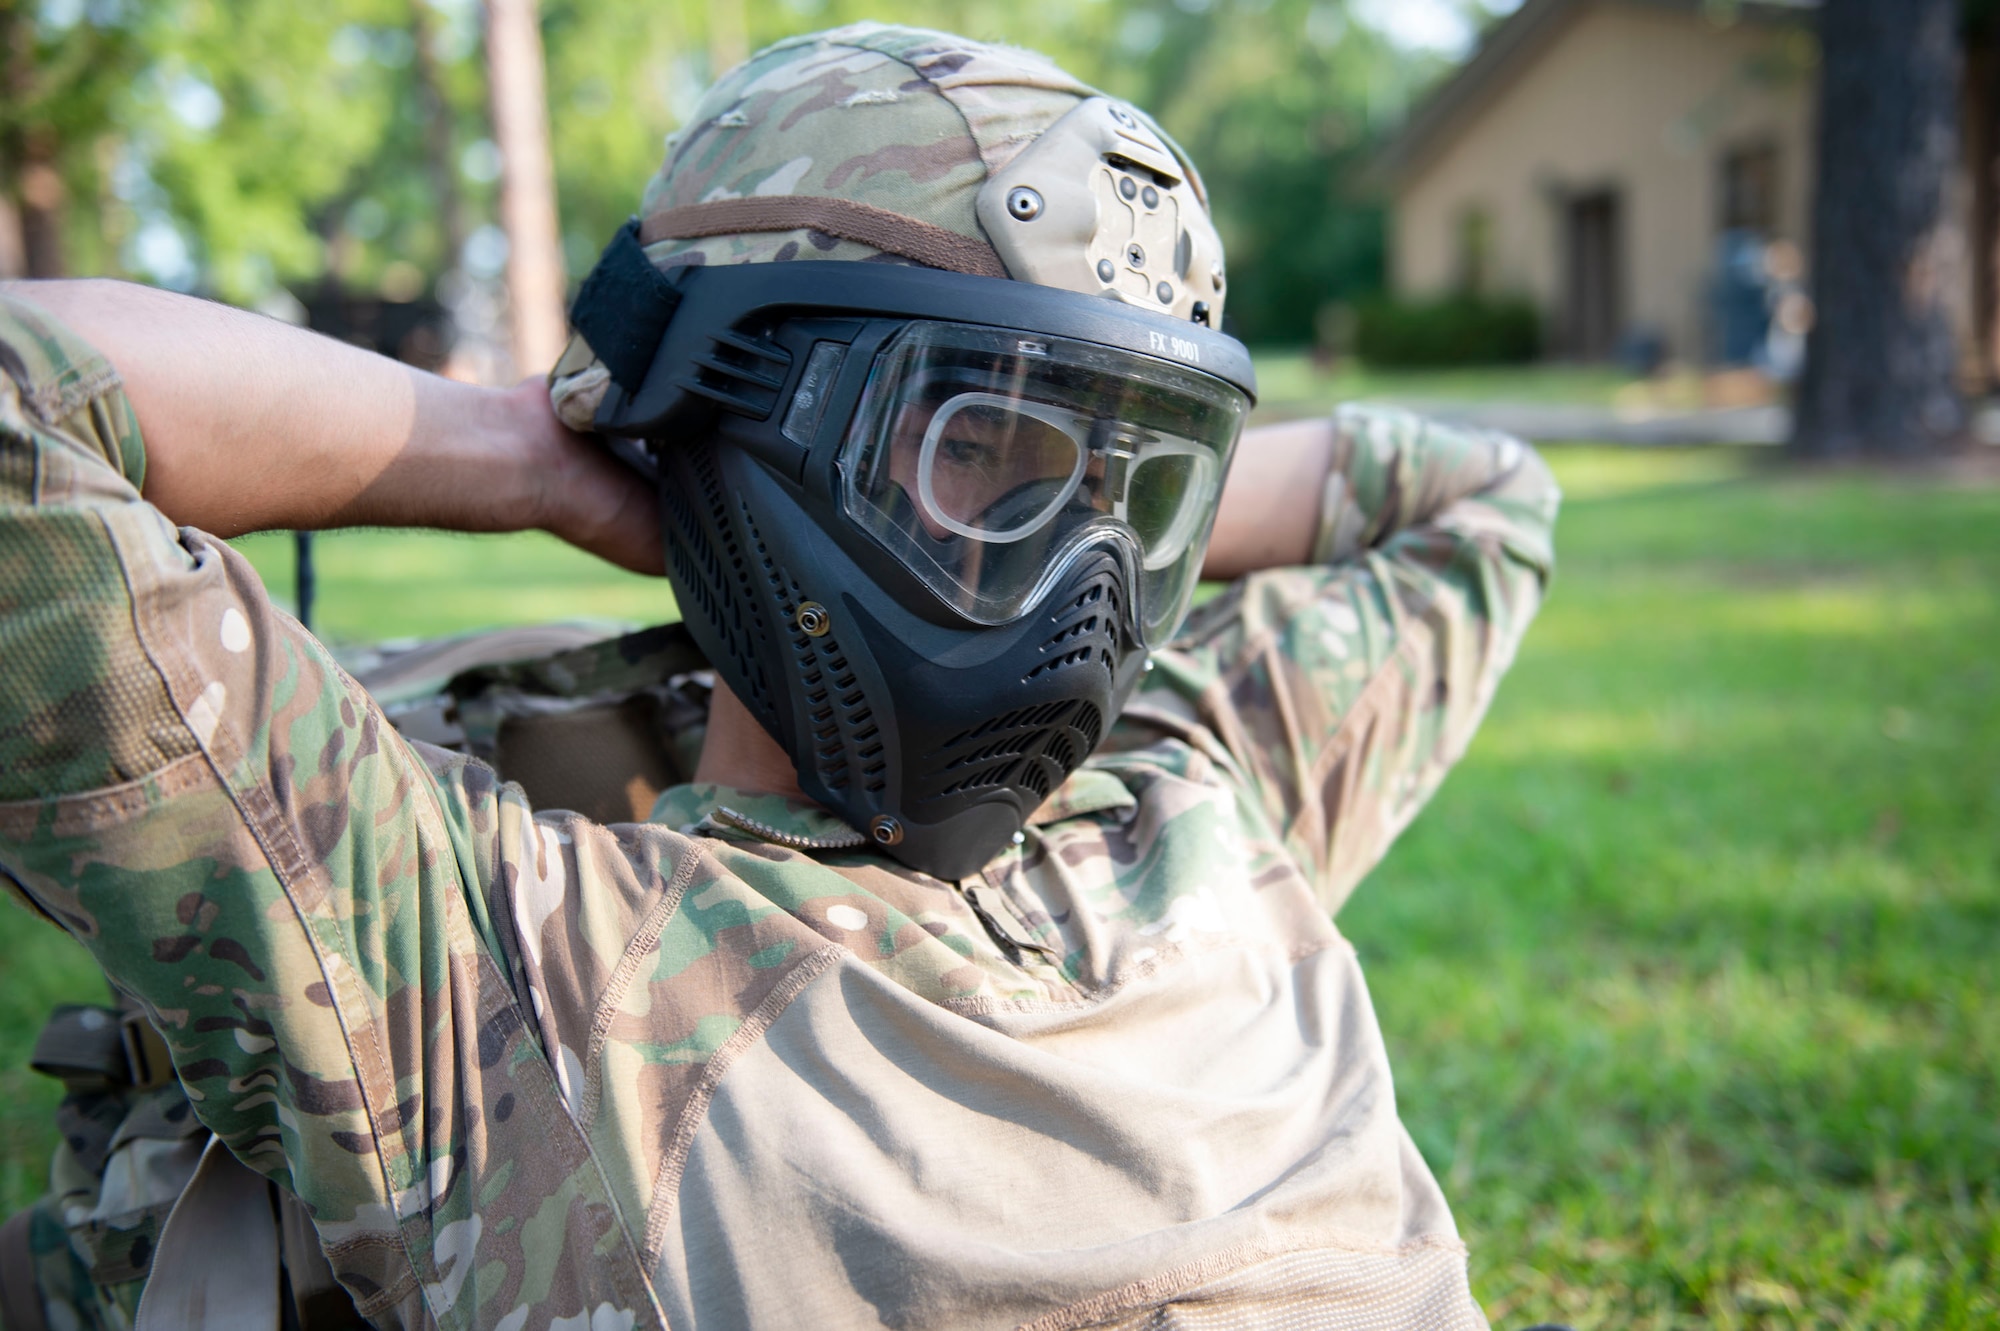 Airman 1st Class Andres Gonzales, 824th Base Defense Squadron fire team member, puts on a simunition mask during the Tactical Leaders Course, Aug. 10, 2019, at Moody Air Force Base, Ga. The 7-day course revolved around squad leaders developing their skills to effectively communicate, team build and mission plan. These skills were assessed during a 36-hour simulated operation where squad leaders lead Airmen through tactical situations. (U.S. Air Force photo by Airman Azaria E. Foster)